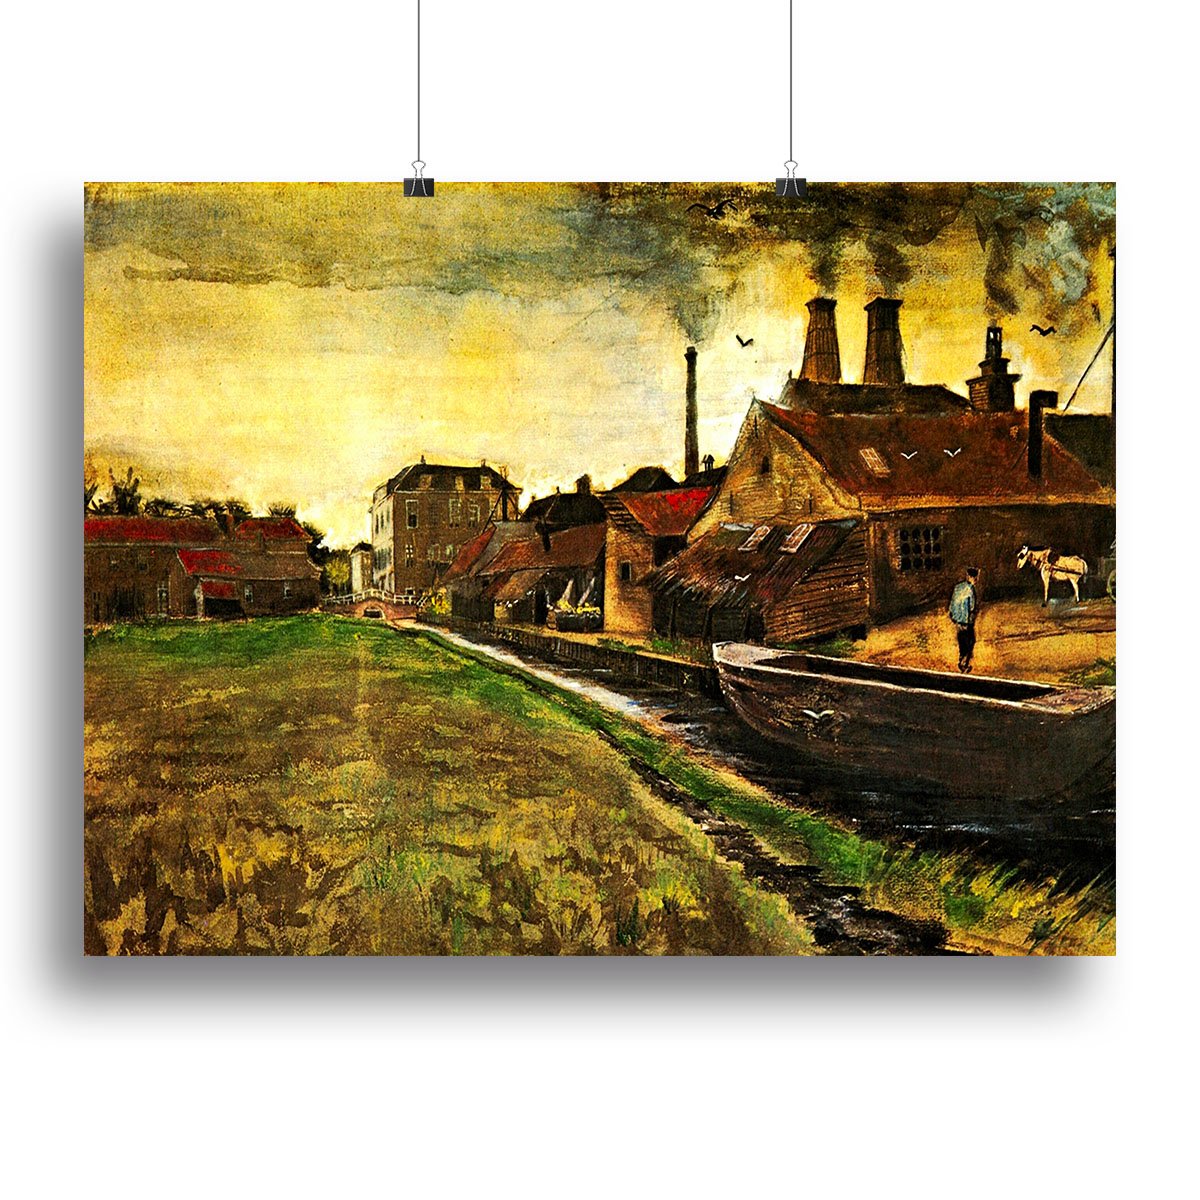 Iron Mill in The Hague by Van Gogh Canvas Print or Poster